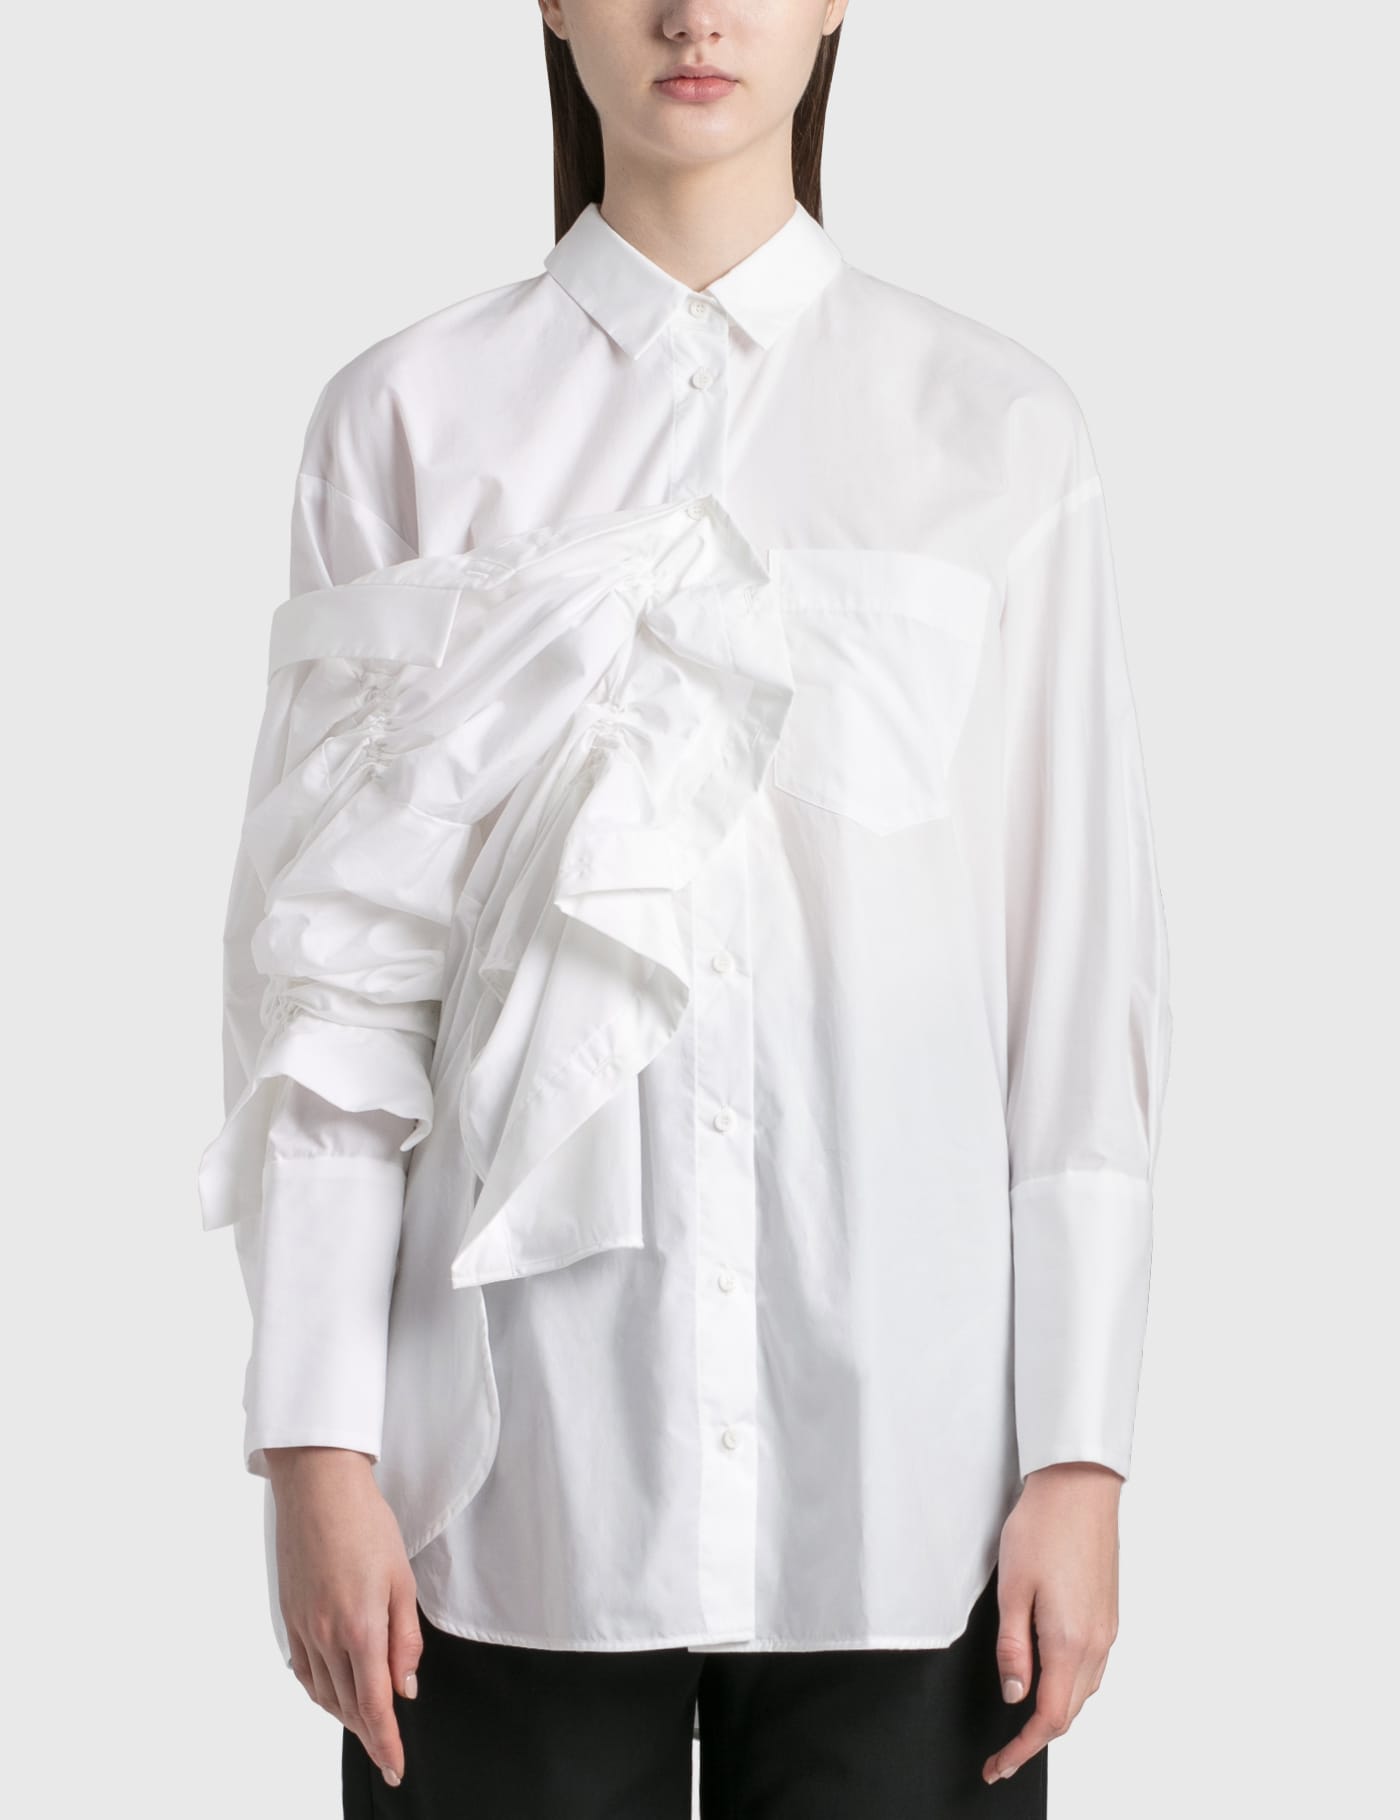 Enföld - Reconstruction Shirt | HBX - Globally Curated Fashion and